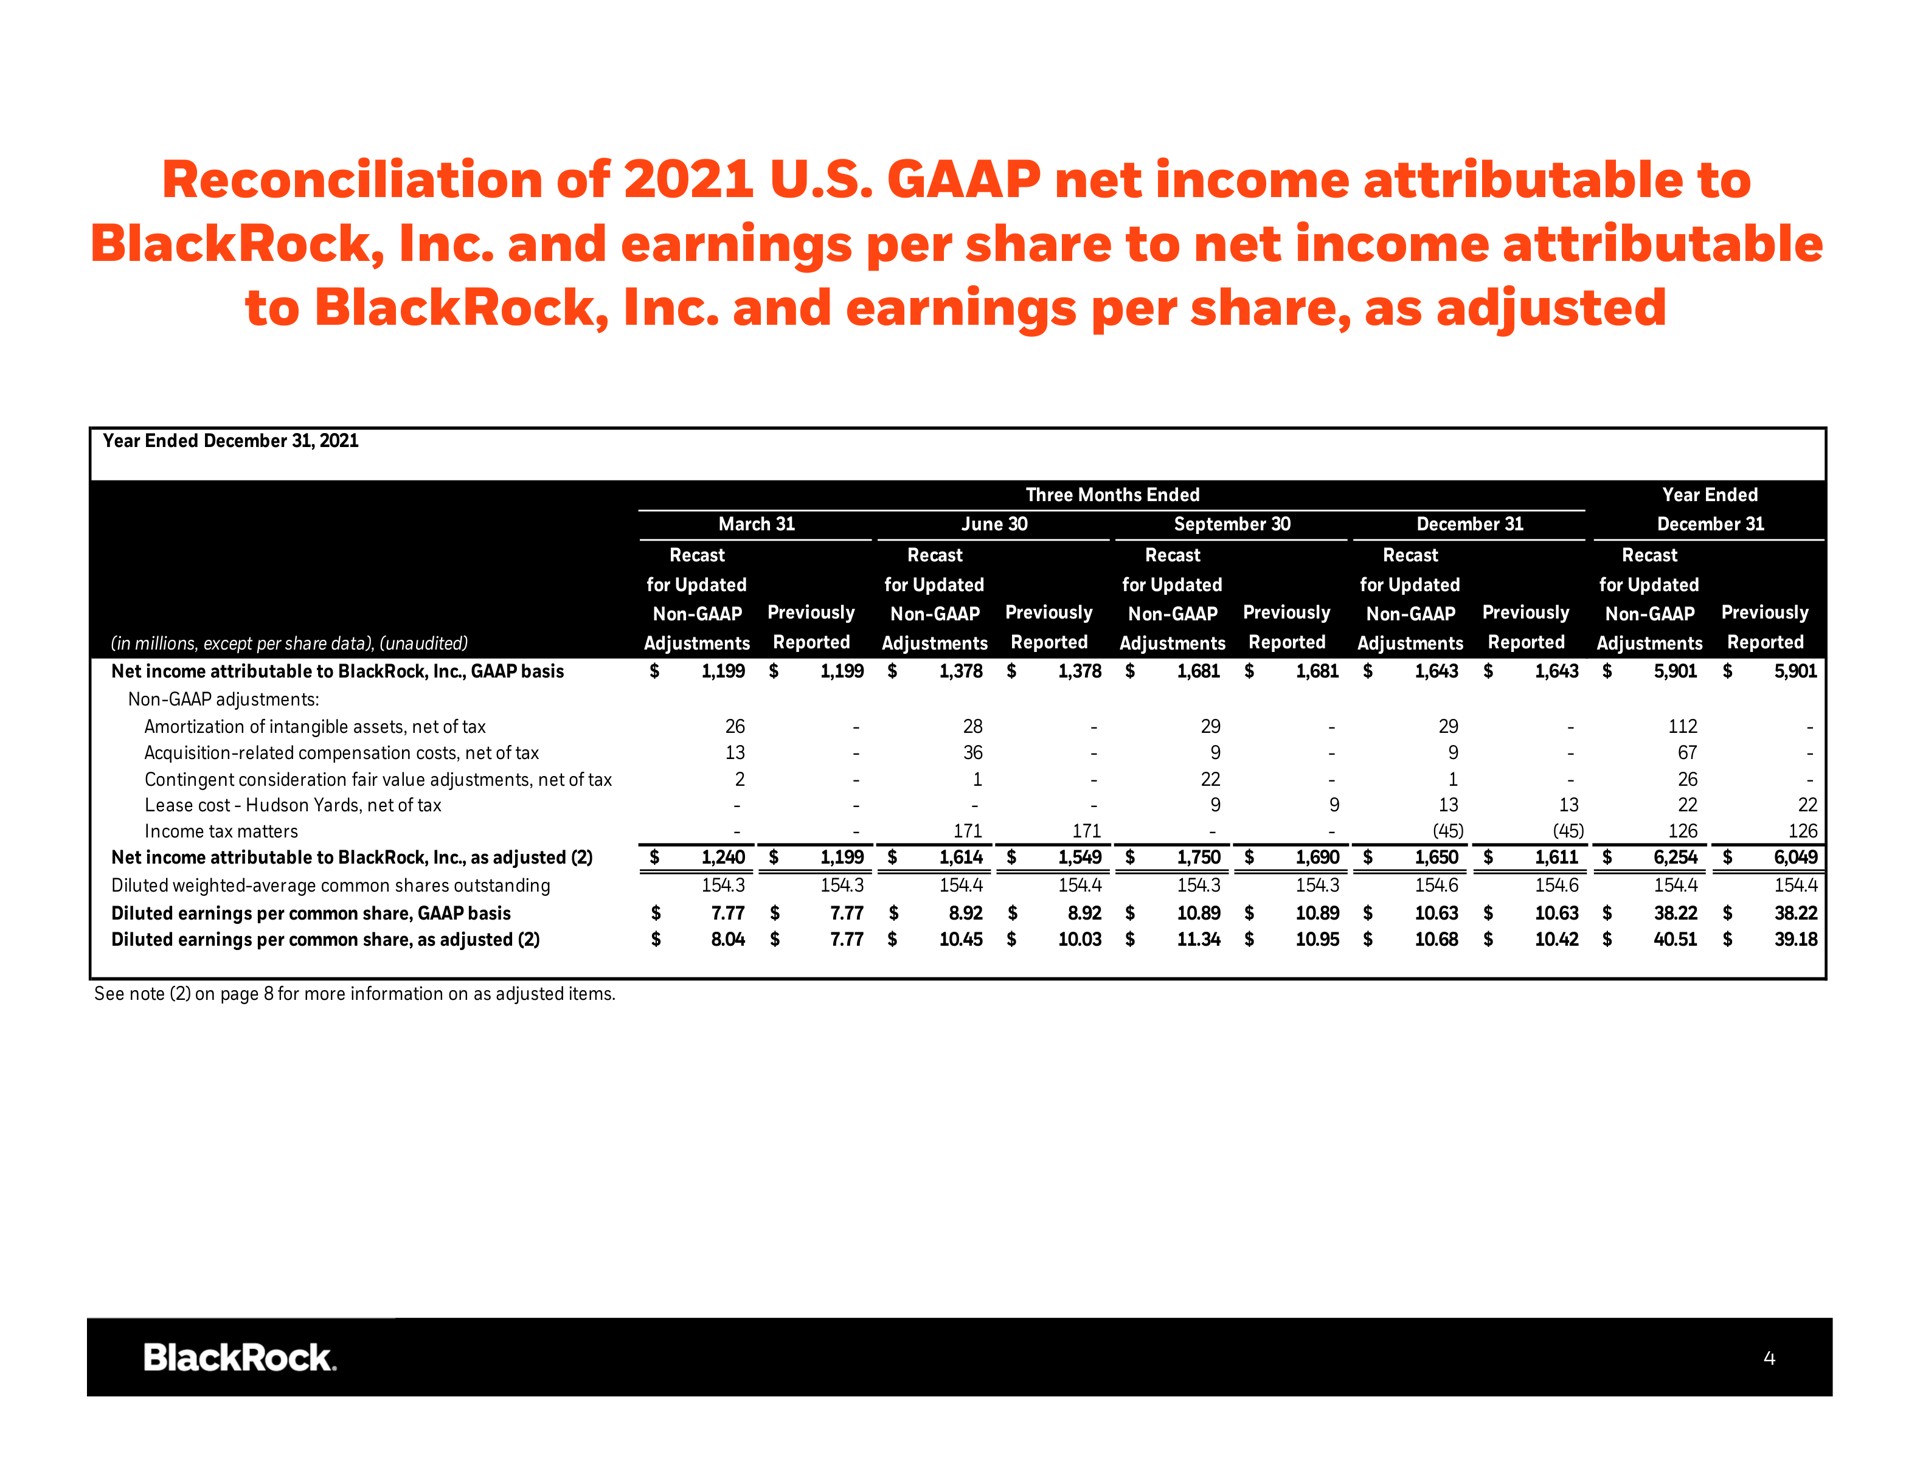 reconciliation of net income attributable to and earnings per share to net income attributable to and earnings per share as adjusted | BlackRock